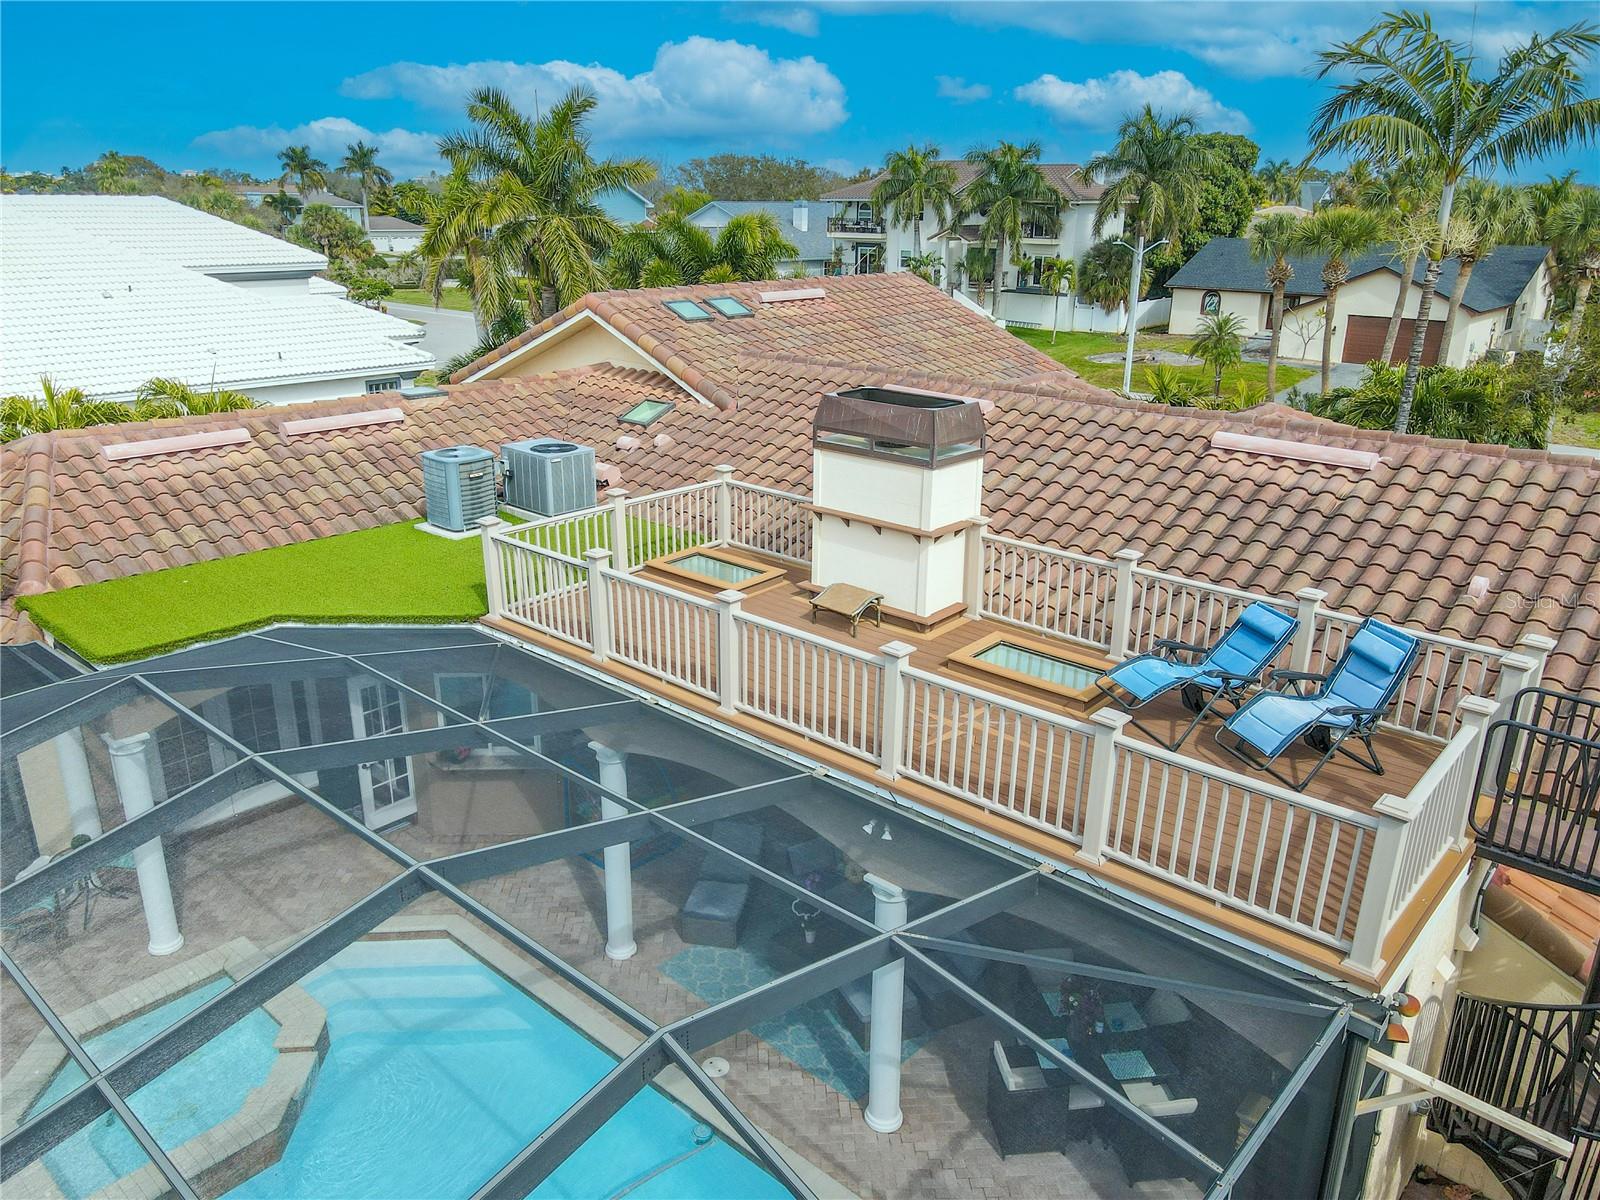 Pool and sun deck from above.